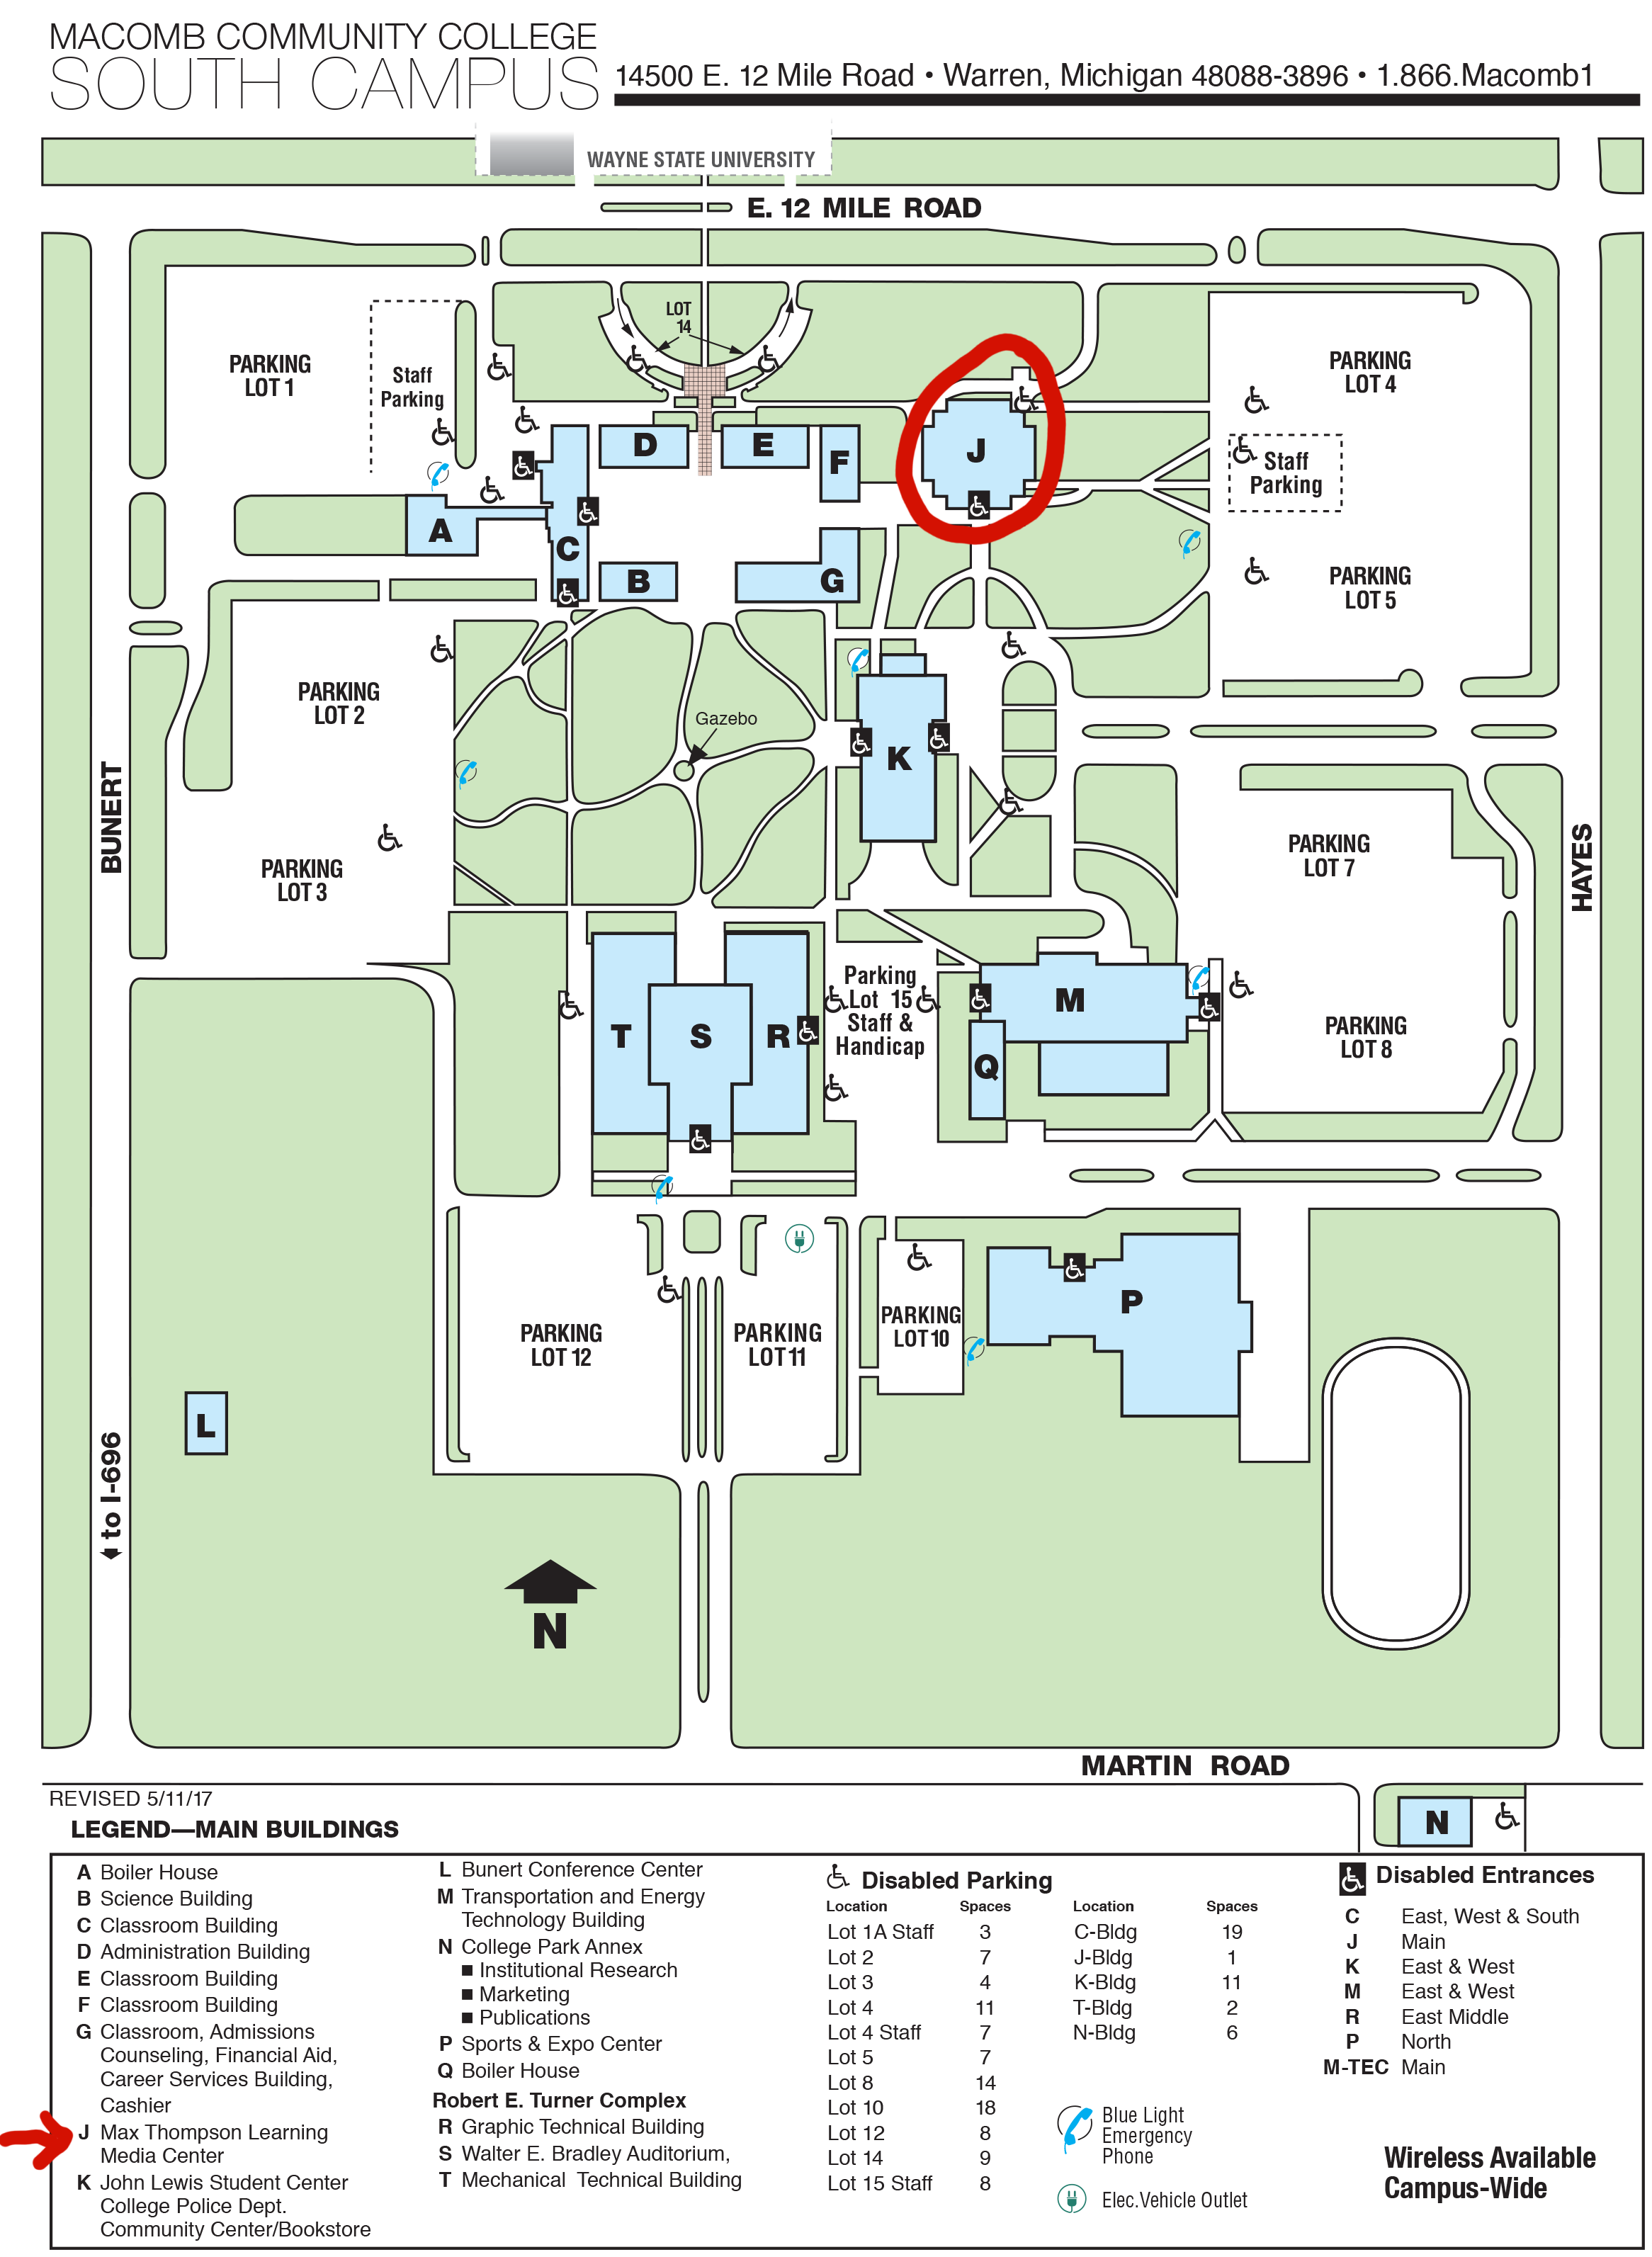 macomb community college south campus map Macomb South Campus Map Campus Map macomb community college south campus map